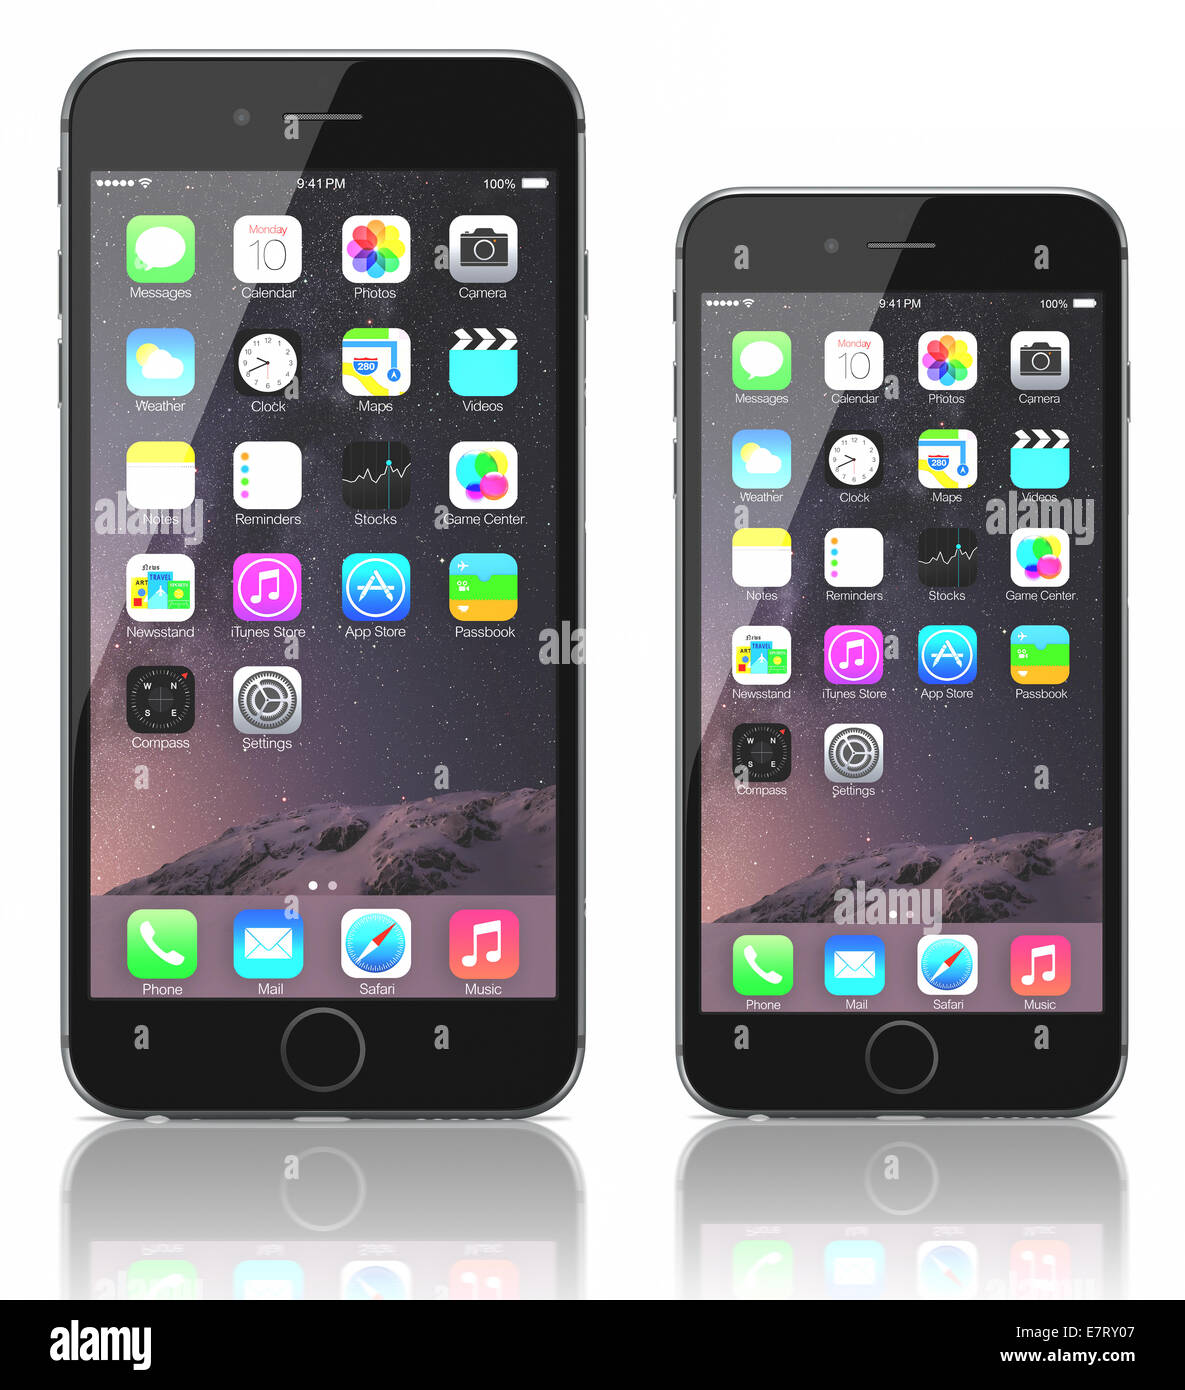 Apple Space Gray Iphone 6 Plus And Iphone 6 Showing The Home Screen With Ios 8 Stock Photo Alamy